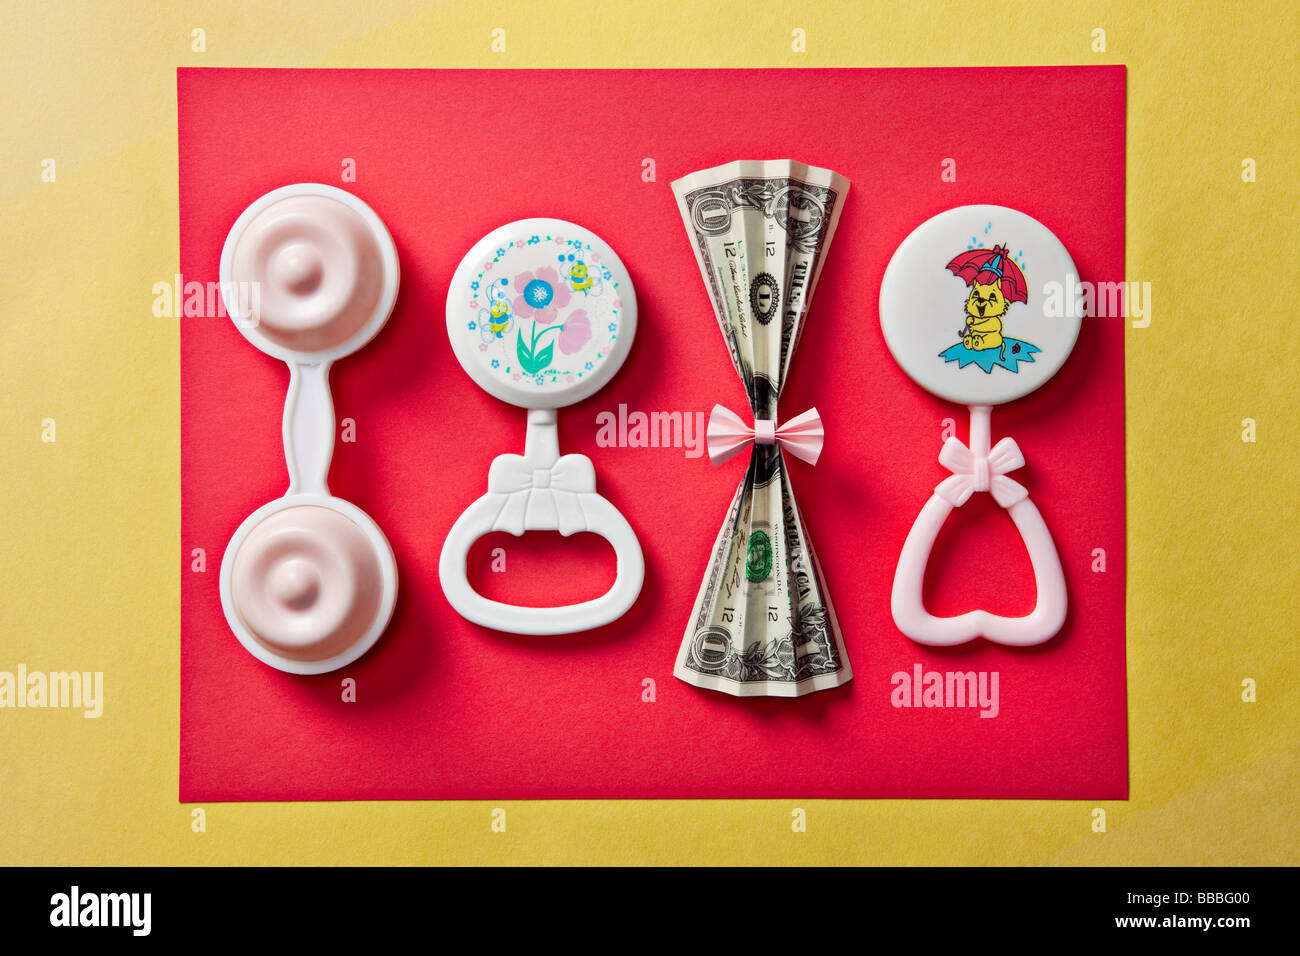 baby rattles and dollar bill on red and yellow background Stock Photo